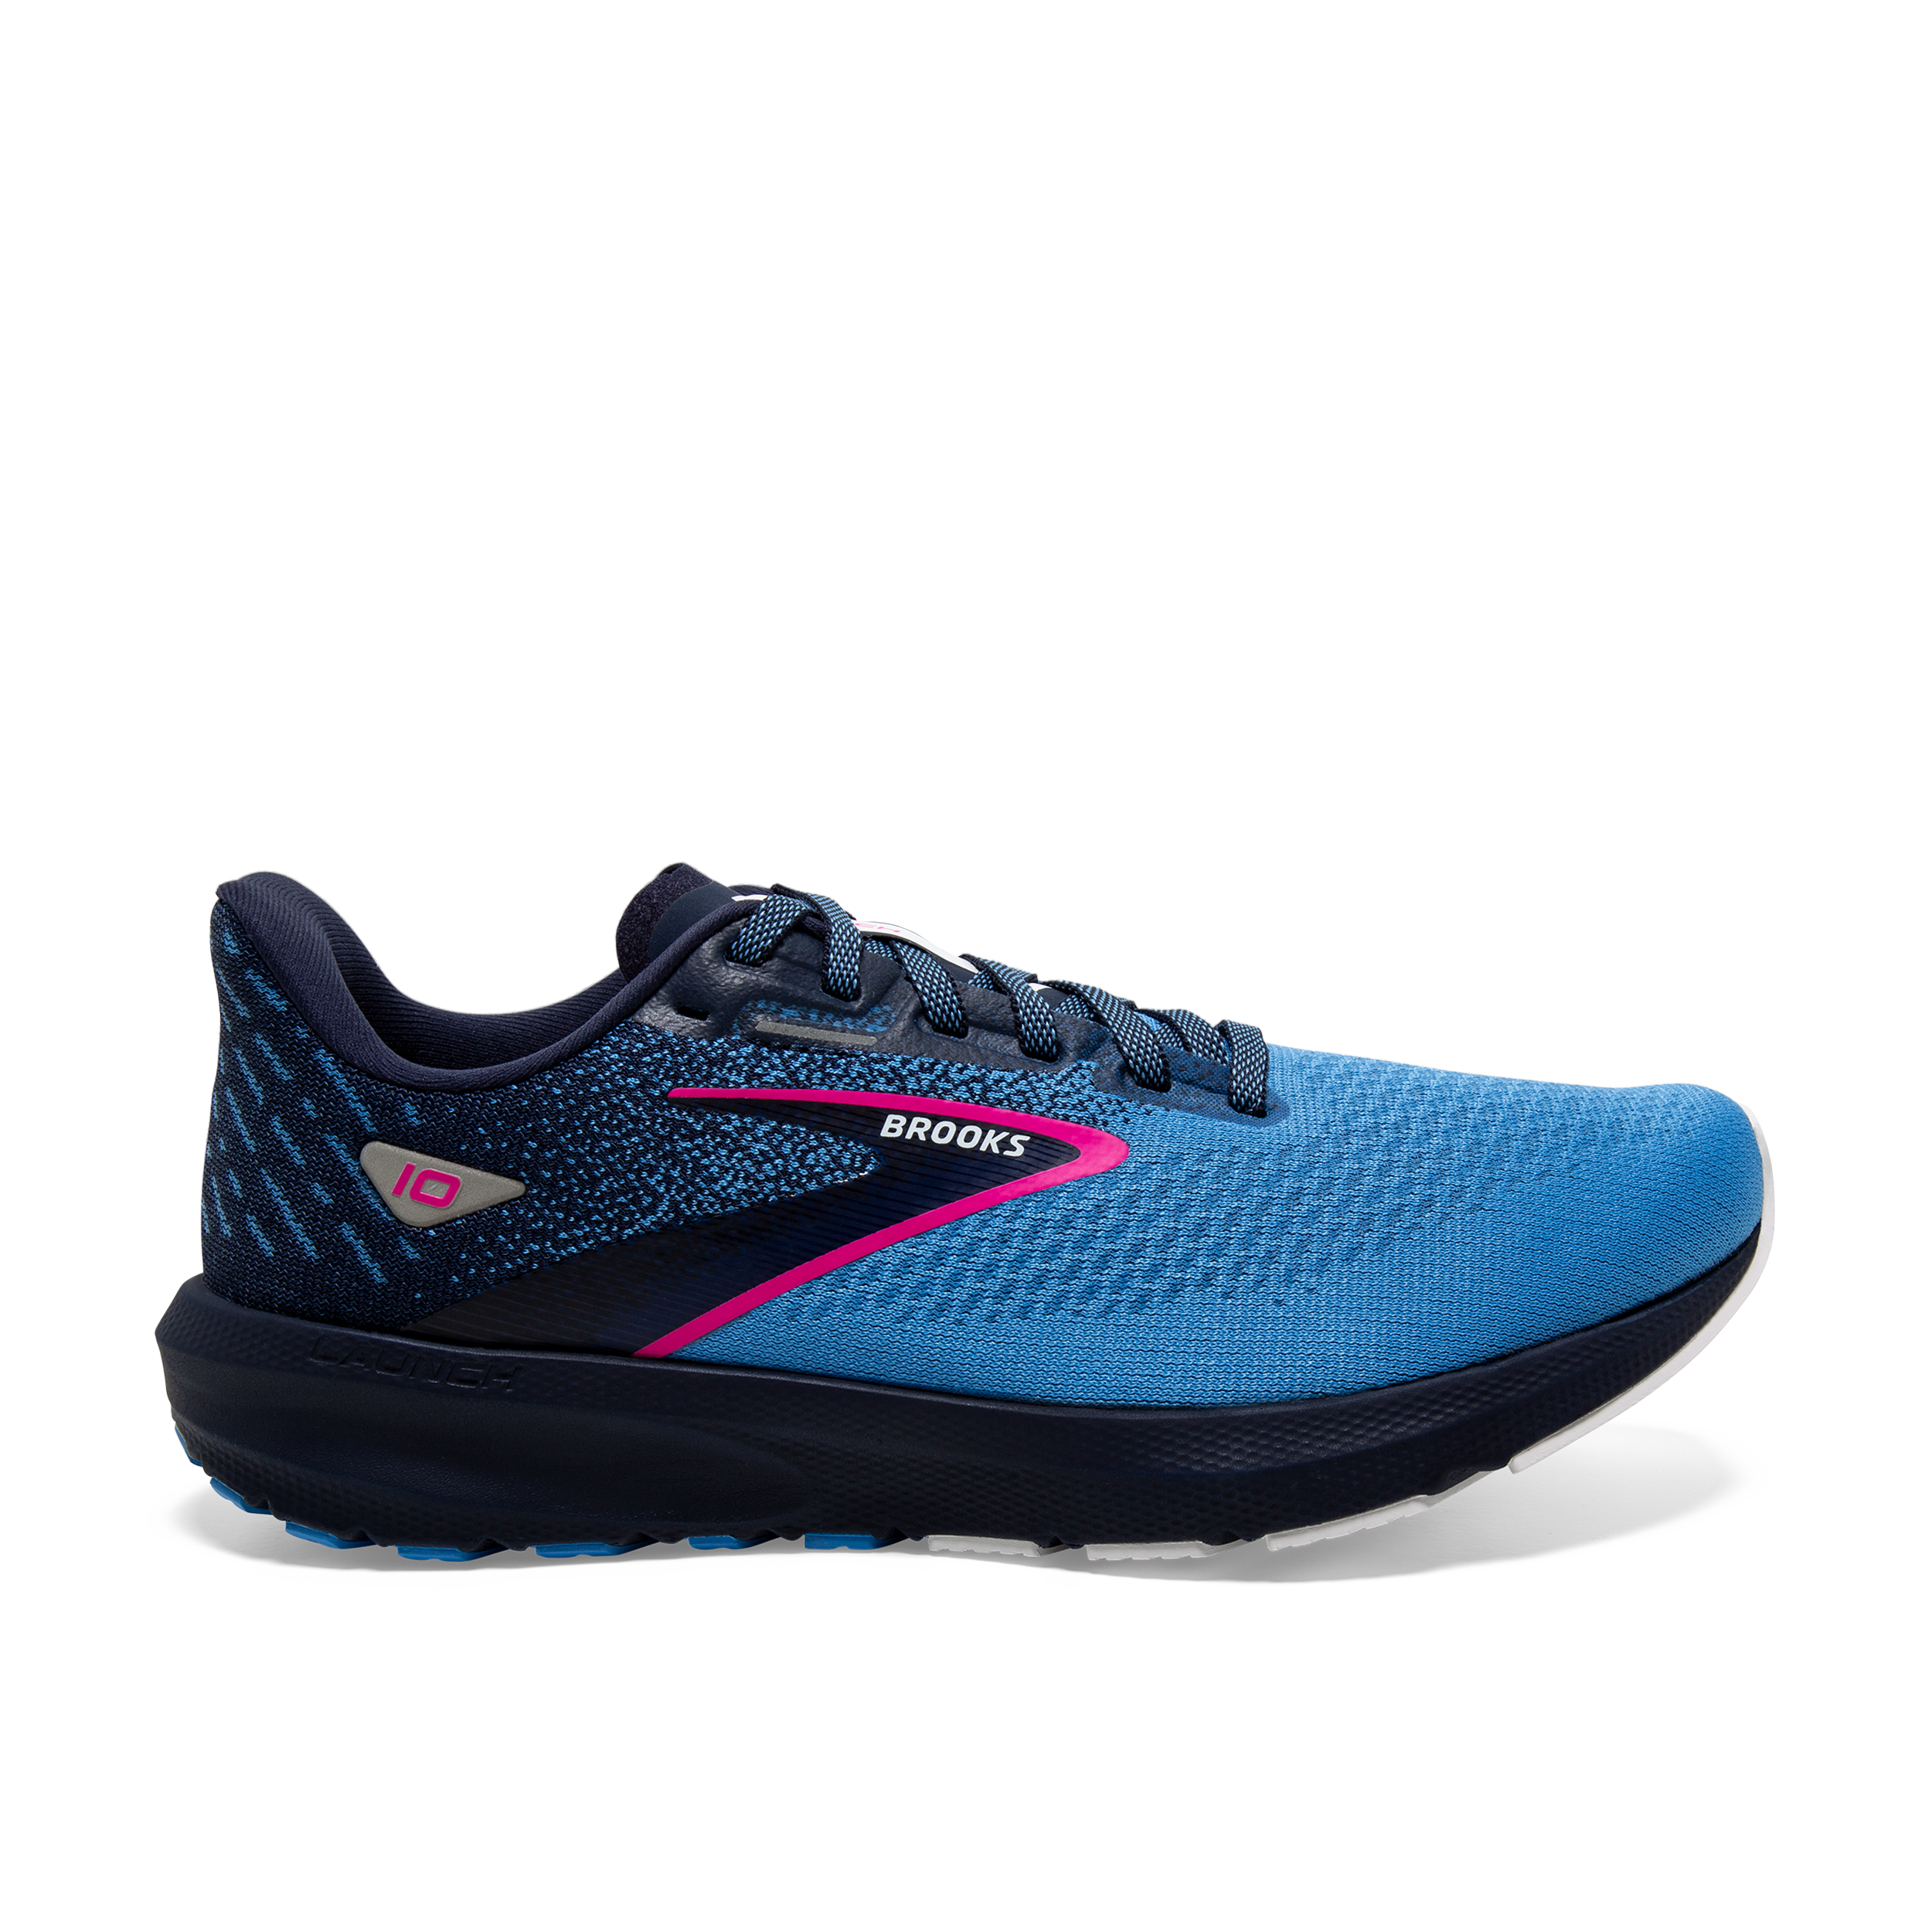 Best Women's Running Shoes: Footwear for trail and road runs  Checkout –  Best Deals, Expert Product Reviews & Buying Guides